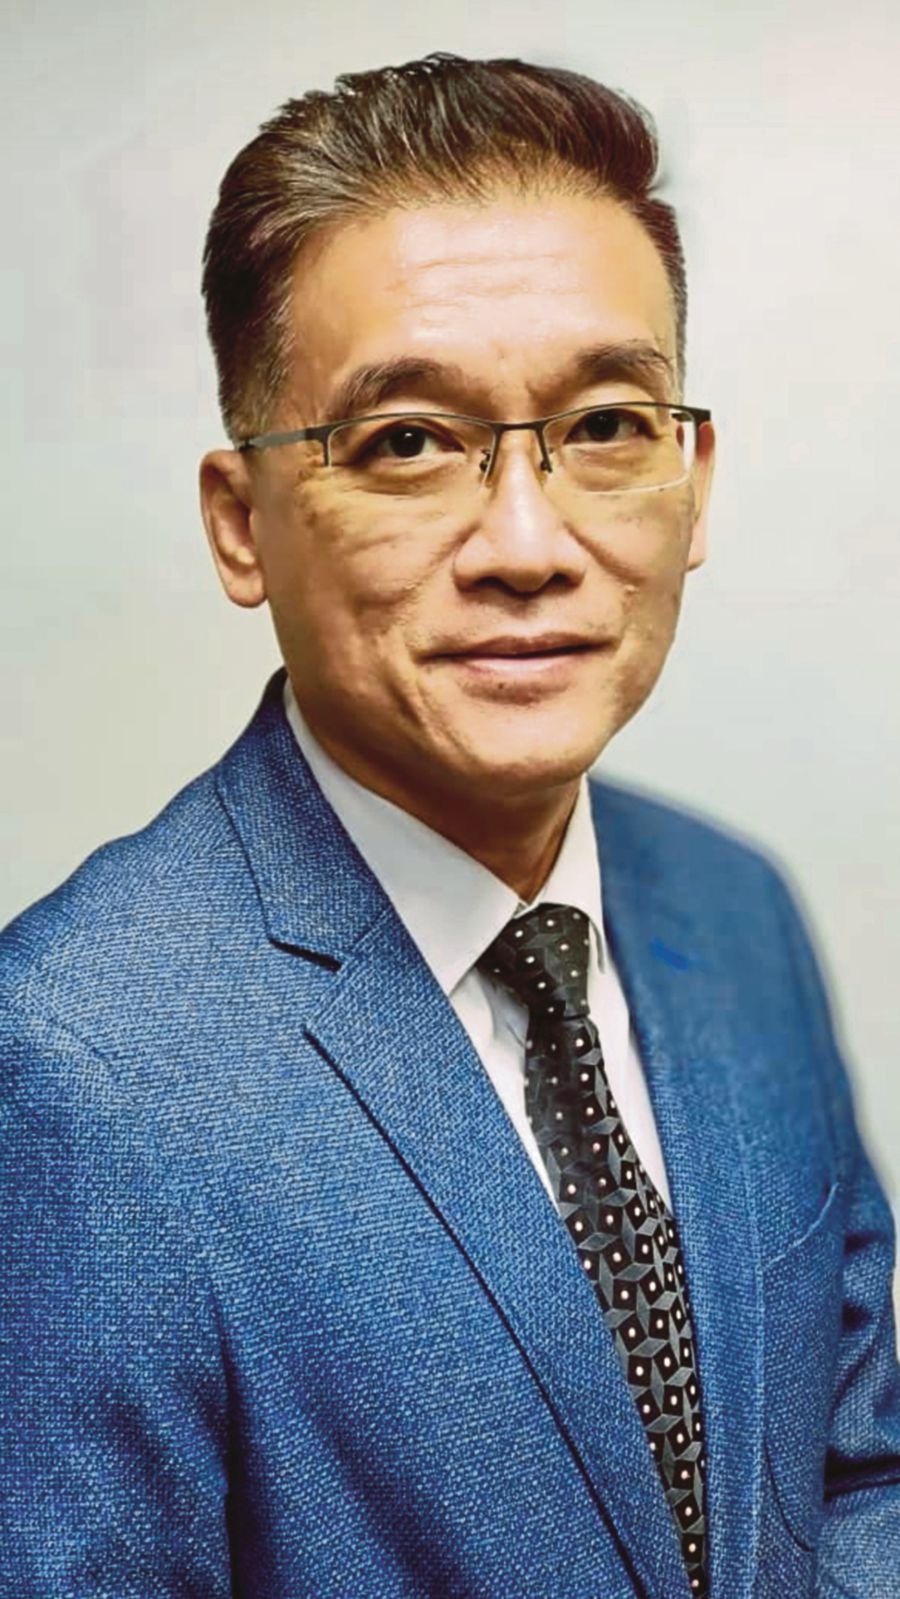 Founding member of the Global Respiratory Infection Partnership Malaysia, Dr Koh Kar Chai, says general practitioners, along with other healthcare professionals, are now aware of antimicrobial resistance and counsel their patients on it.